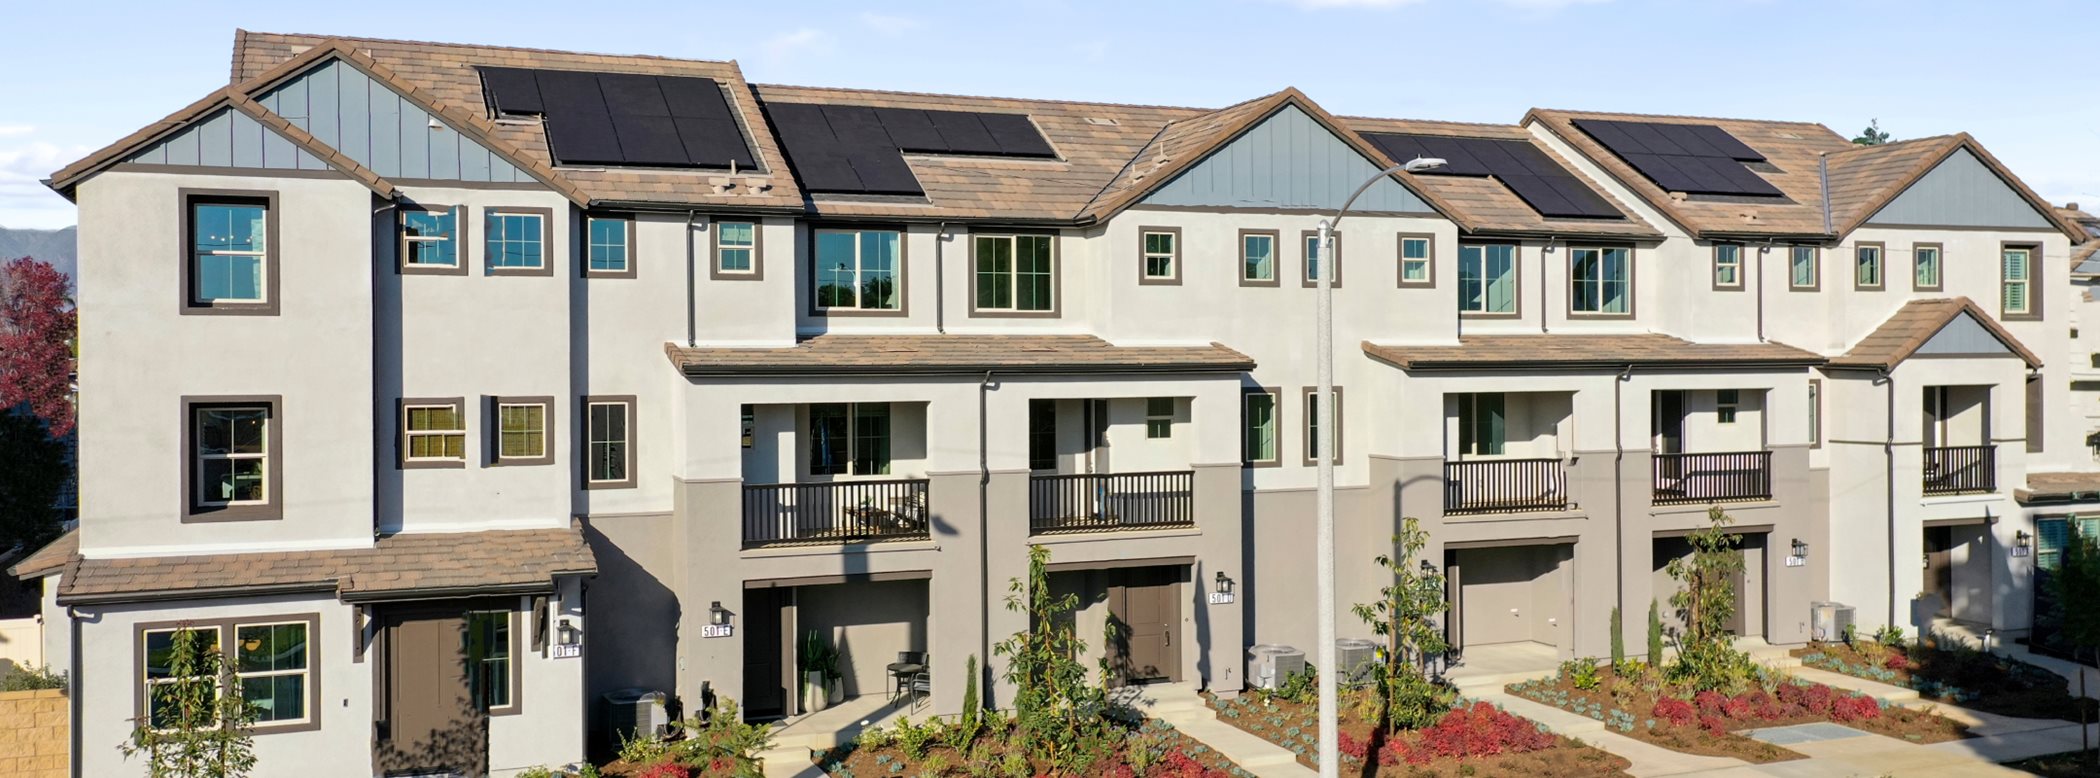 Picture of townhomes in Jade community